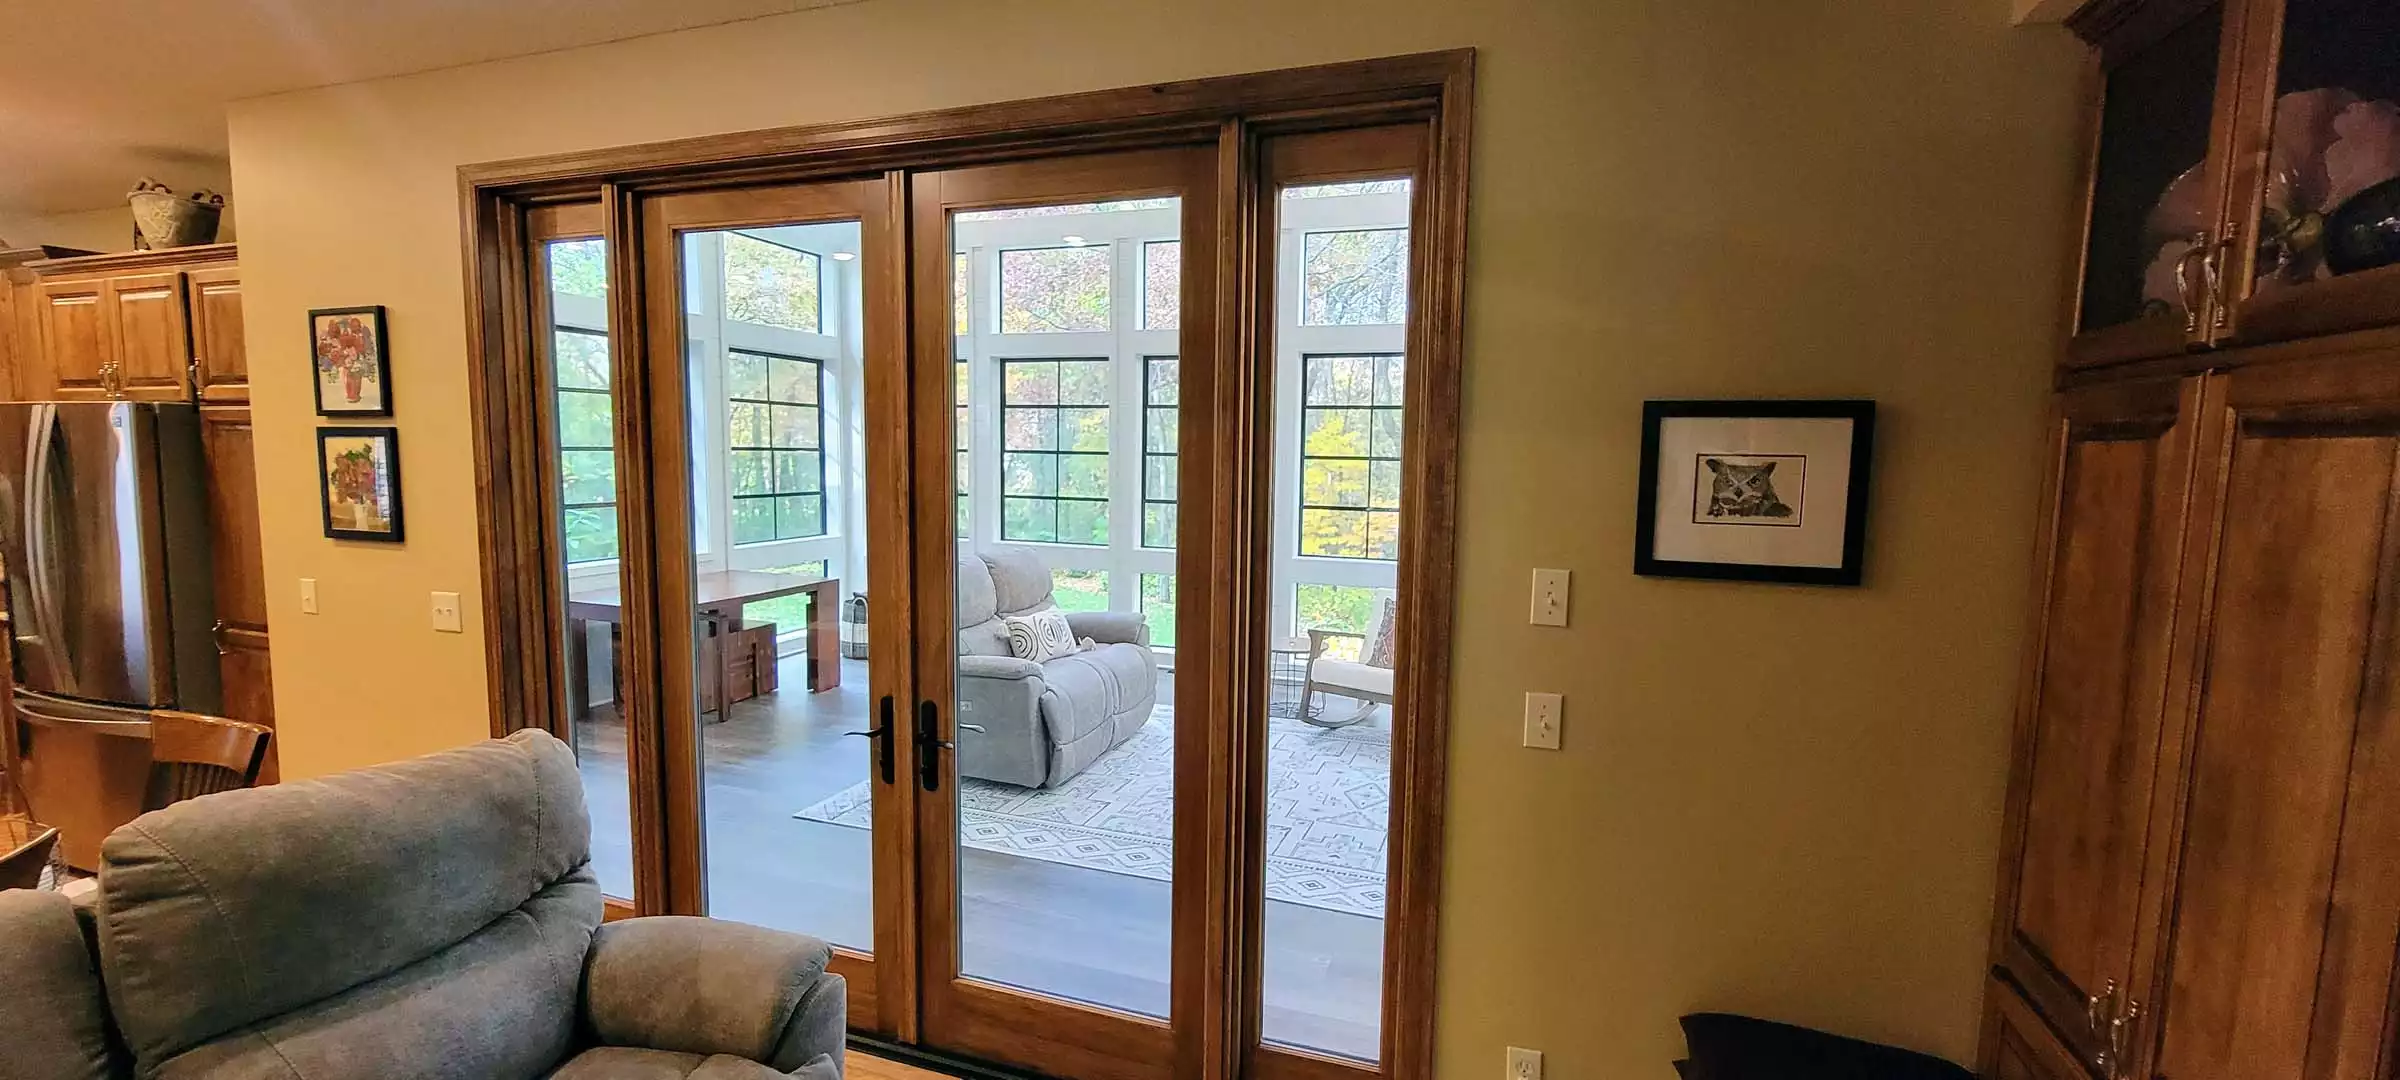 New Pella Architectural French door system to home